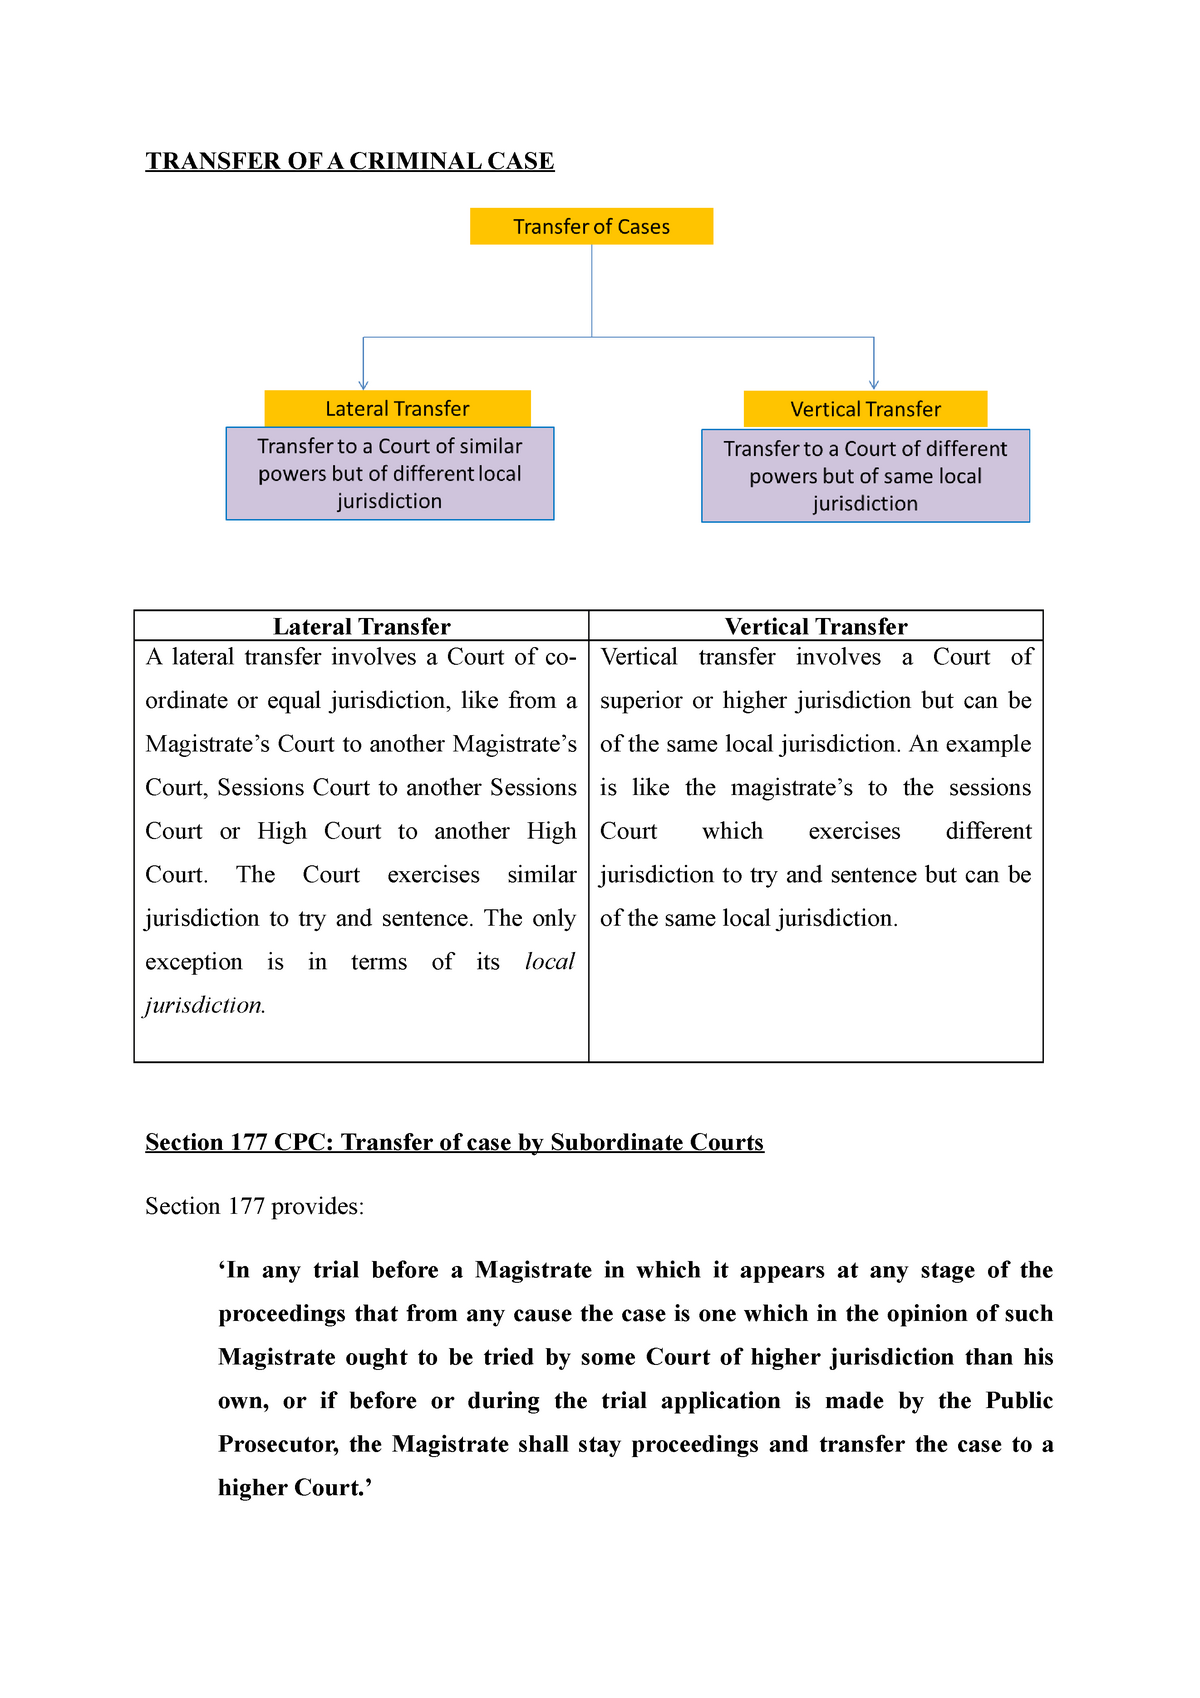 research paper on transfer of criminal cases